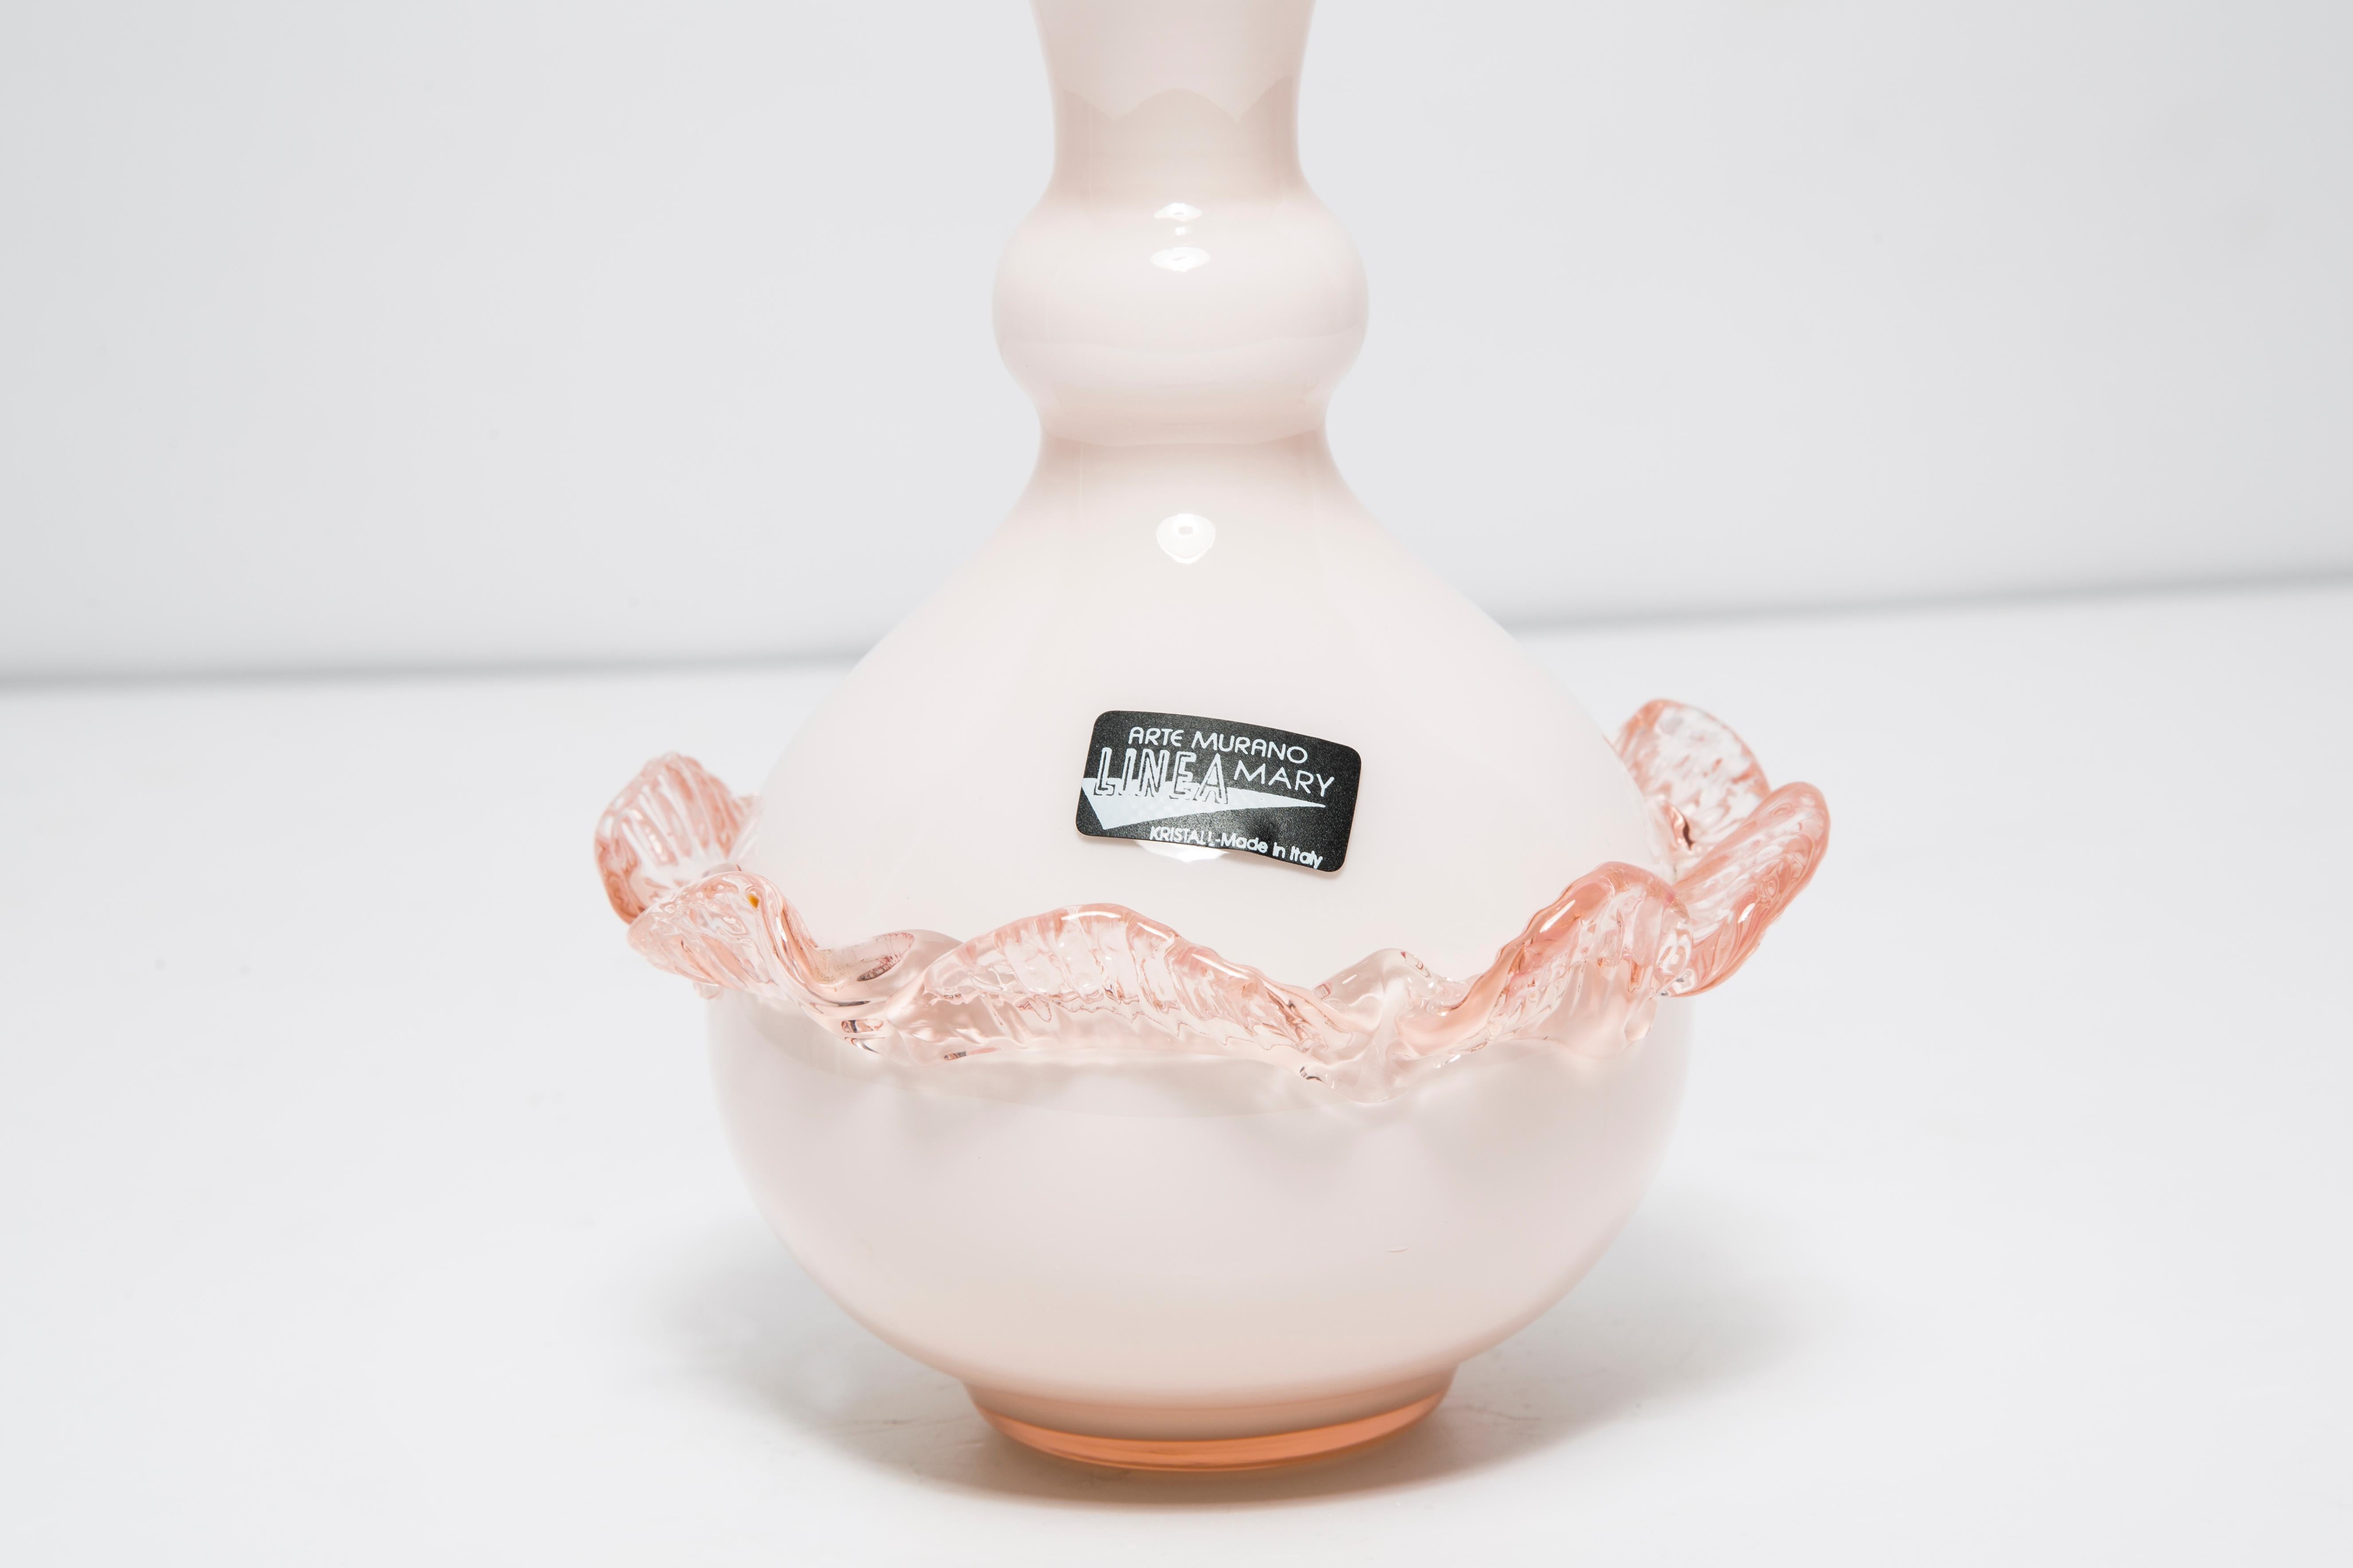 Mid Century Murano Glass Pink Small Vase with a Frill, Italy, Europe, 1960s For Sale 1